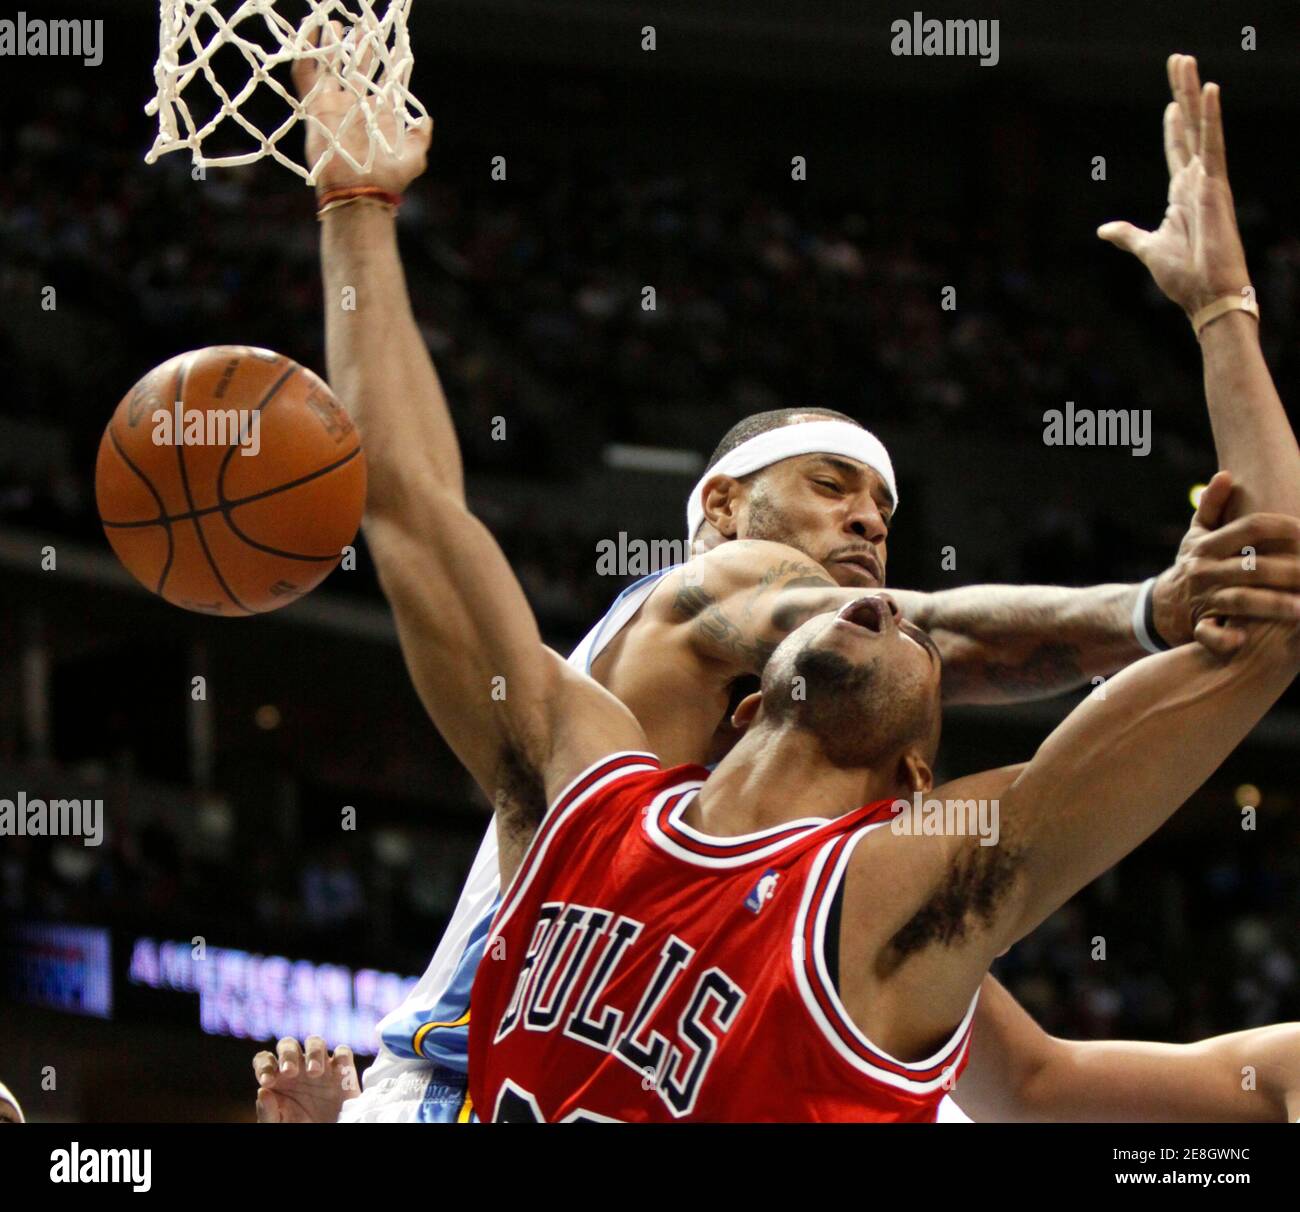 Chicago Bulls forward Taj Gibson is defended by Denver Nuggets forward Kenyon Martin in the third quarter of their NBA basketball game in Denver November 21, 2009. REUTERS/Rick Wilking (UNITED STATES SPORT BASKETBALL) Stock Photo